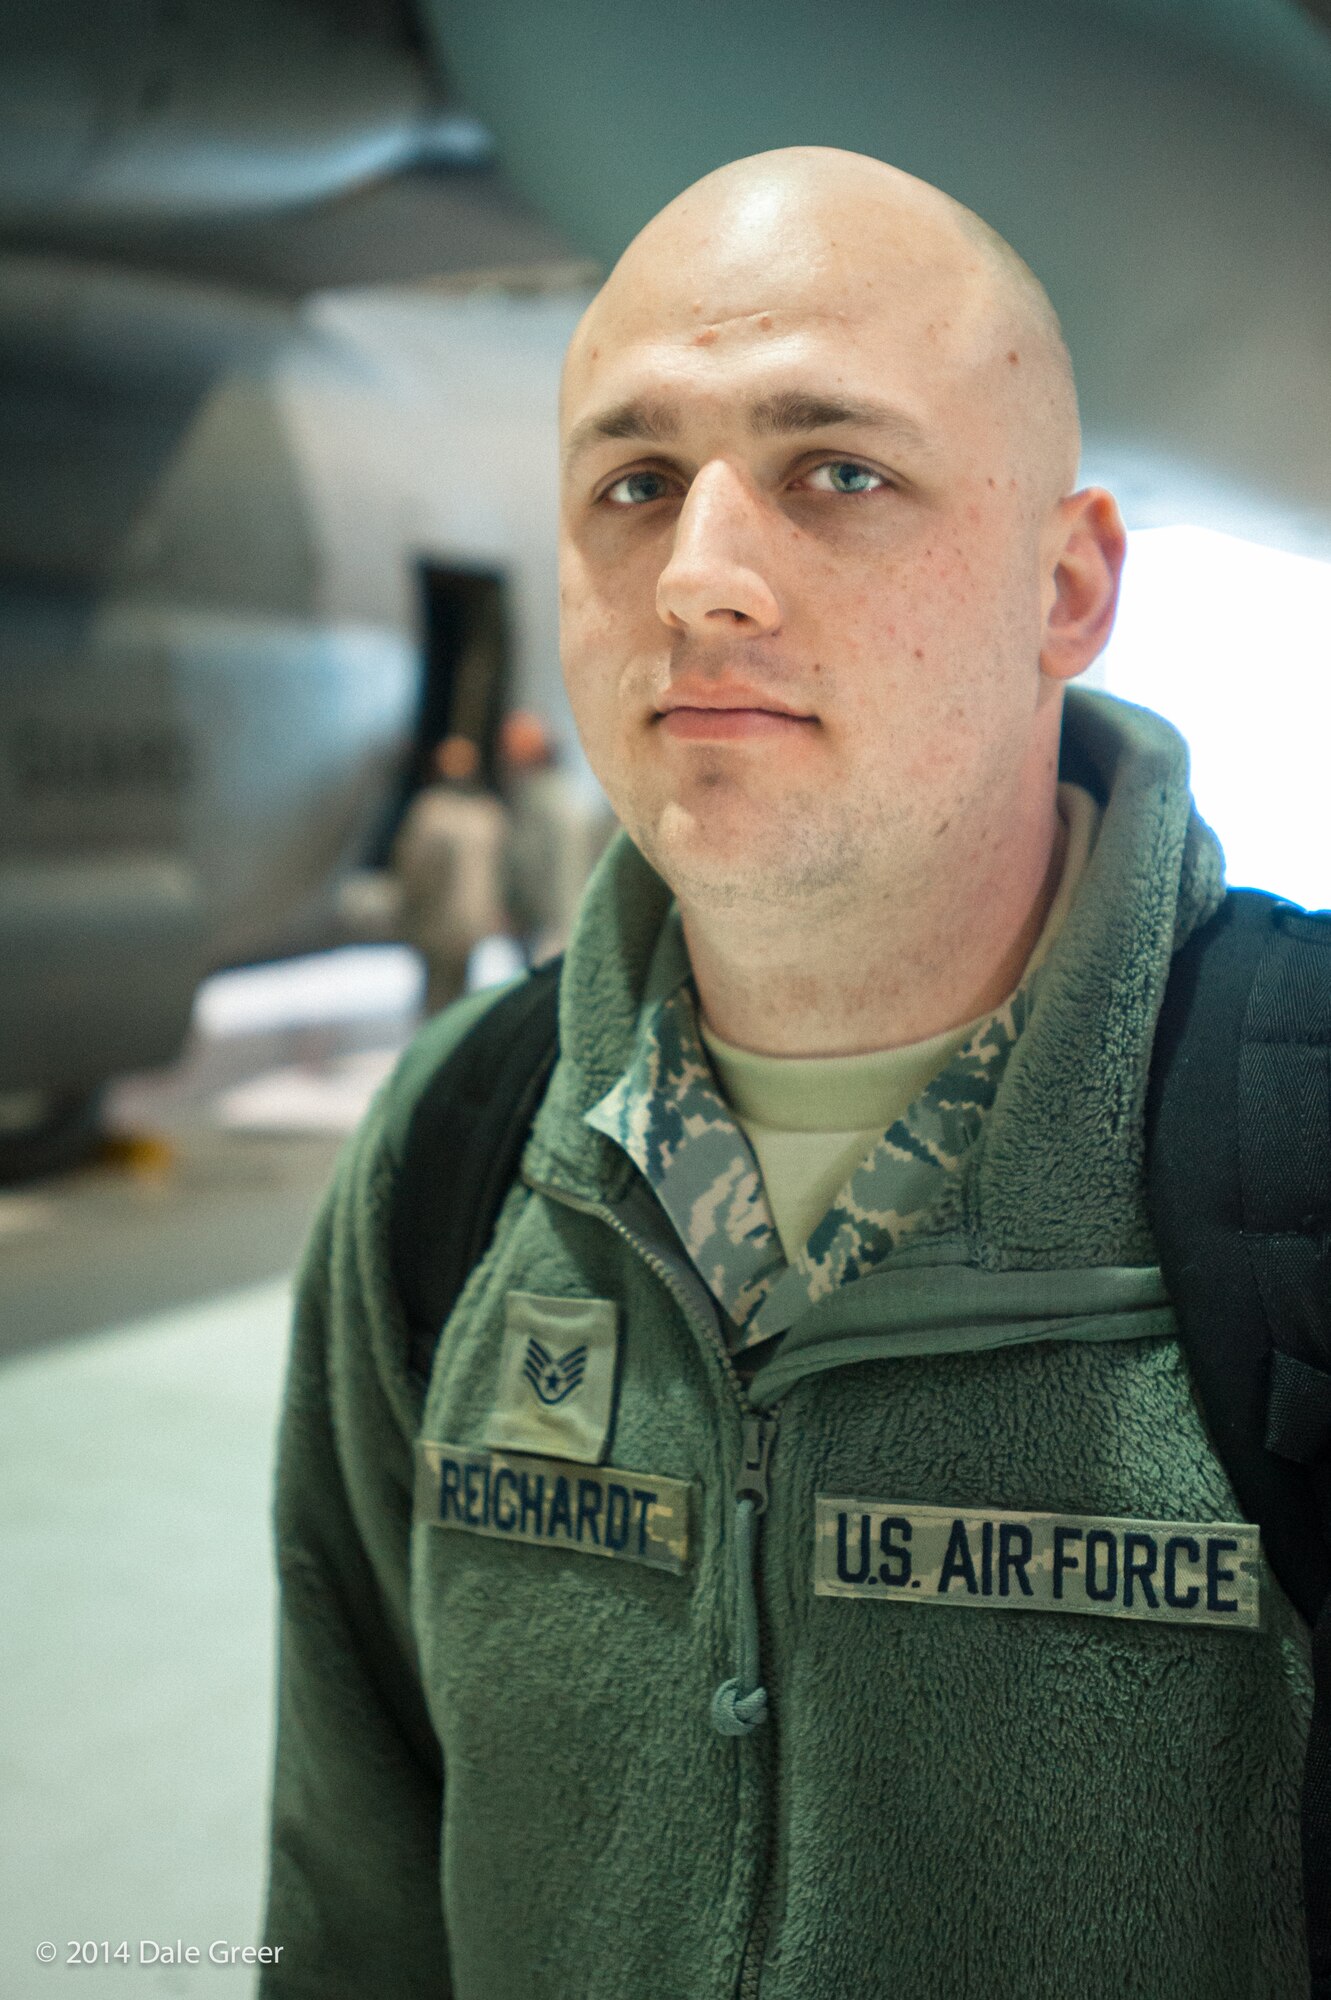 Staff Sgt. Brent Reichardt, an aircraft hydraulics specialist in the Kentucky Air National Guard's 123rd Maintenance Squadron, was awarded the Medal of Valor from the Jefferson County Sheriff’s Office Feb. 20, 2015, for actions he took during a shooting incident at a Louisville, Ky., high school in 2014. Reichardt, who works full-time as a Jefferson County Sheriff’s deputy, is currently deployed to the Persian Gulf in support of airlift operations across the U.S. Central Command Area of Responsibility. (U.S. Air National Guard photo by Maj. Dale Greer)